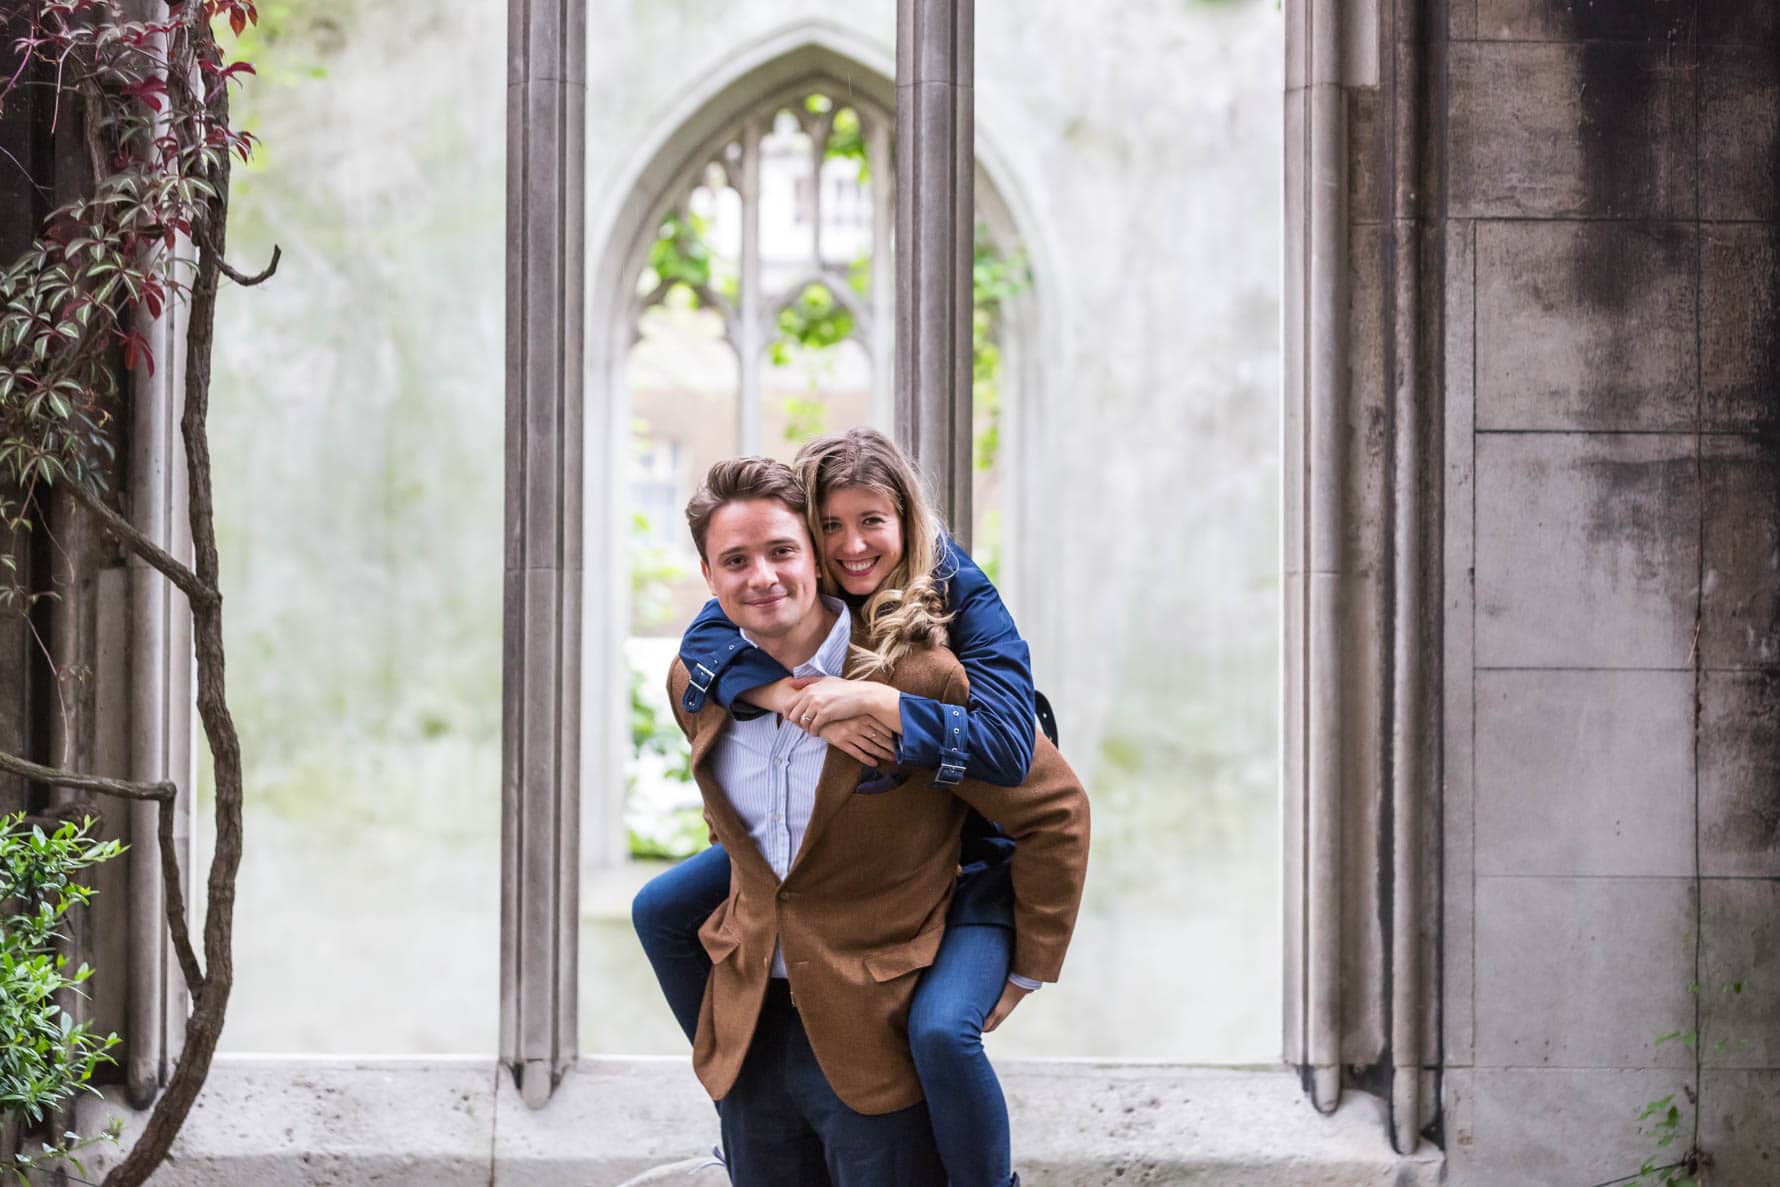 Oliver gives Paula a piggyback during their fun London engagement photoshoot in the beautiful gardens of St Dunstan-in-the-East